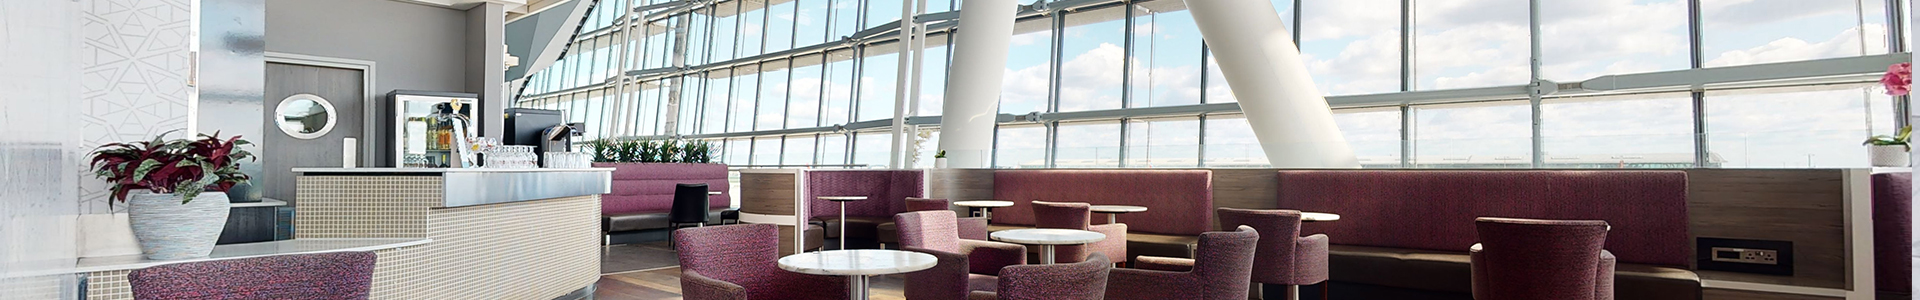 Airport Dimensions, Club Aspire, Airport lounge seating area with runway views